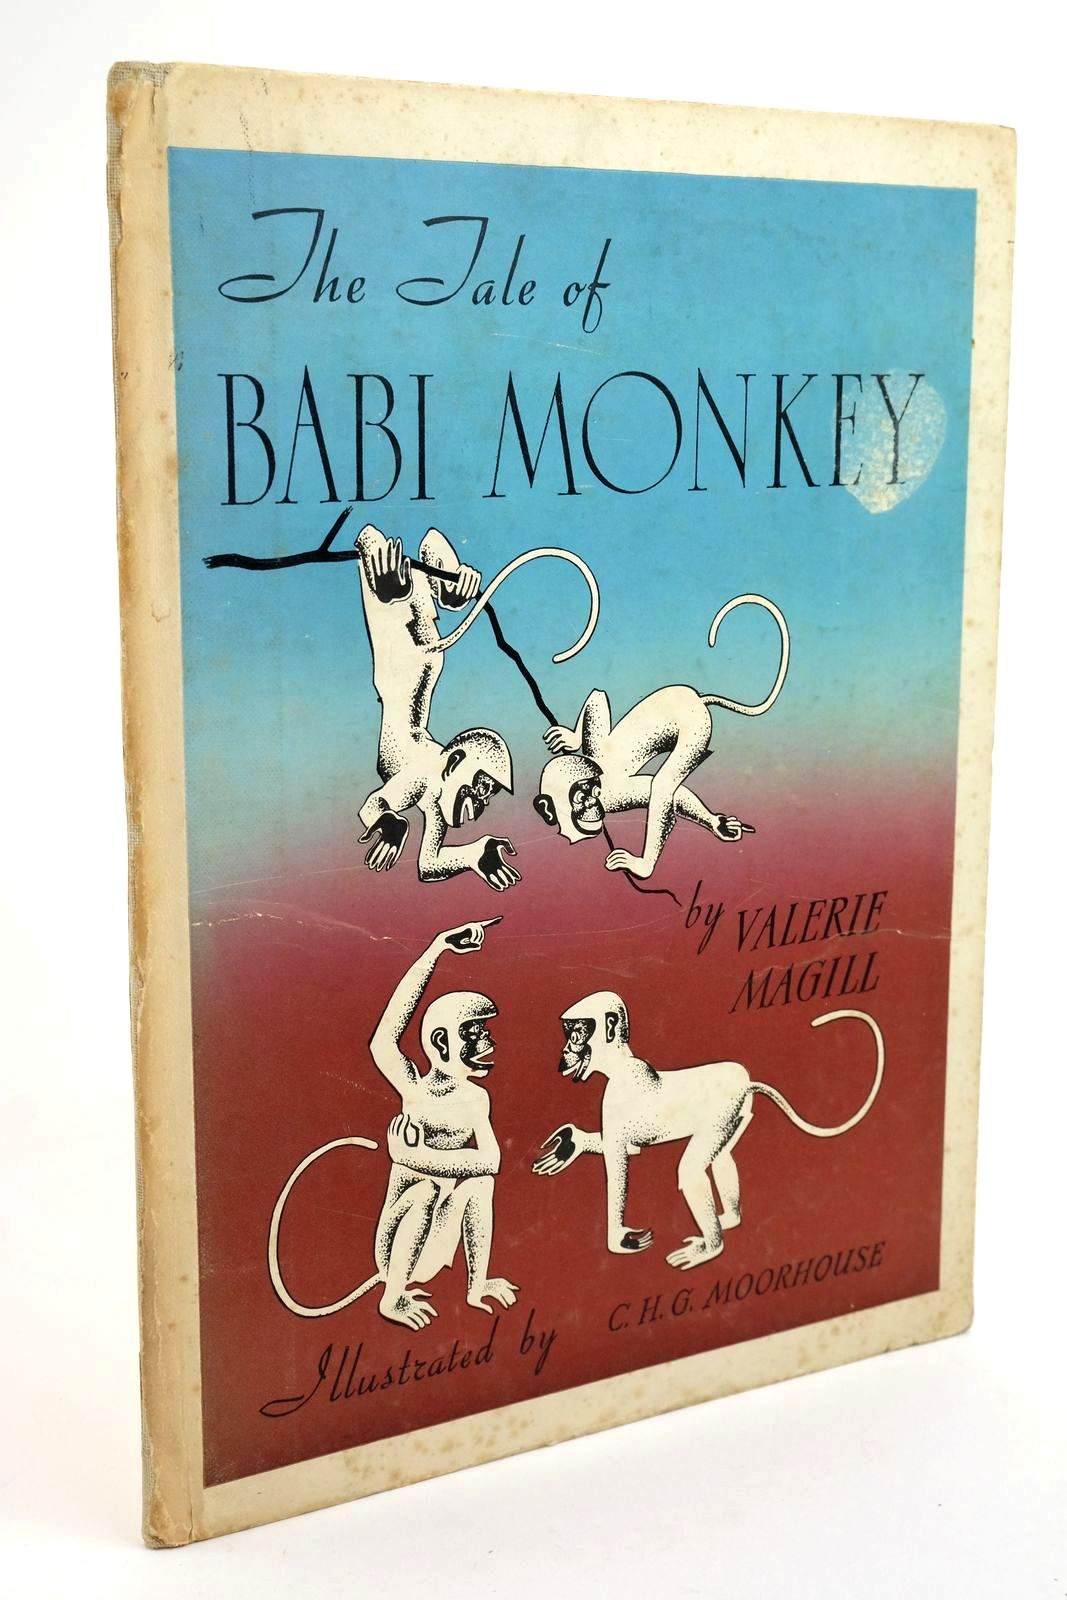 Photo of THE TALE OF BABI MONKEY written by Magill, Valerie illustrated by Moorhouse, C.H.G. published by Longmans, Green & Co. (STOCK CODE: 1321782)  for sale by Stella & Rose's Books